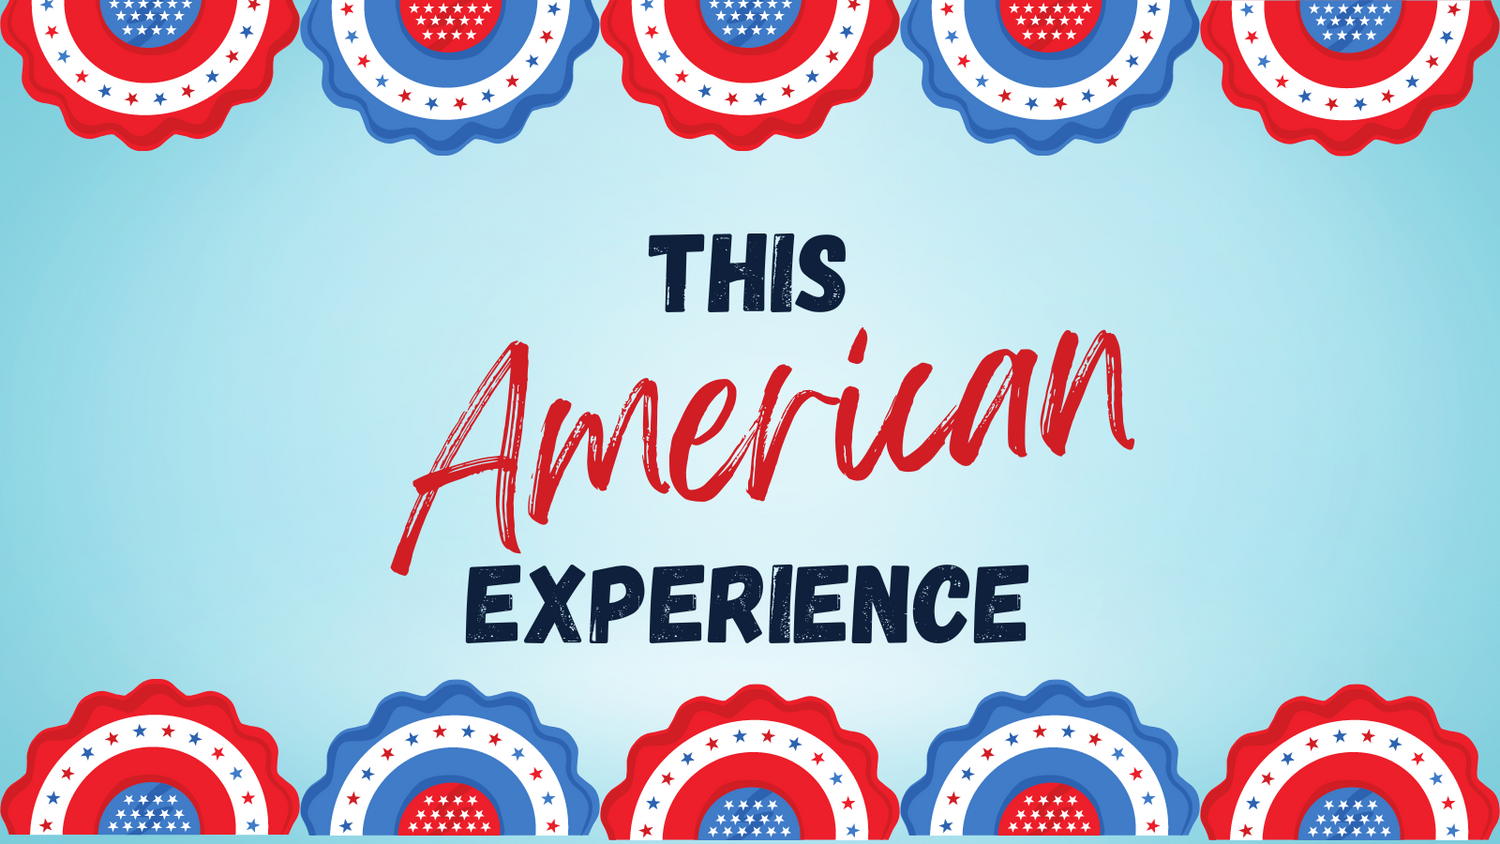 This American Experience Shirt Design Collection Banner Image